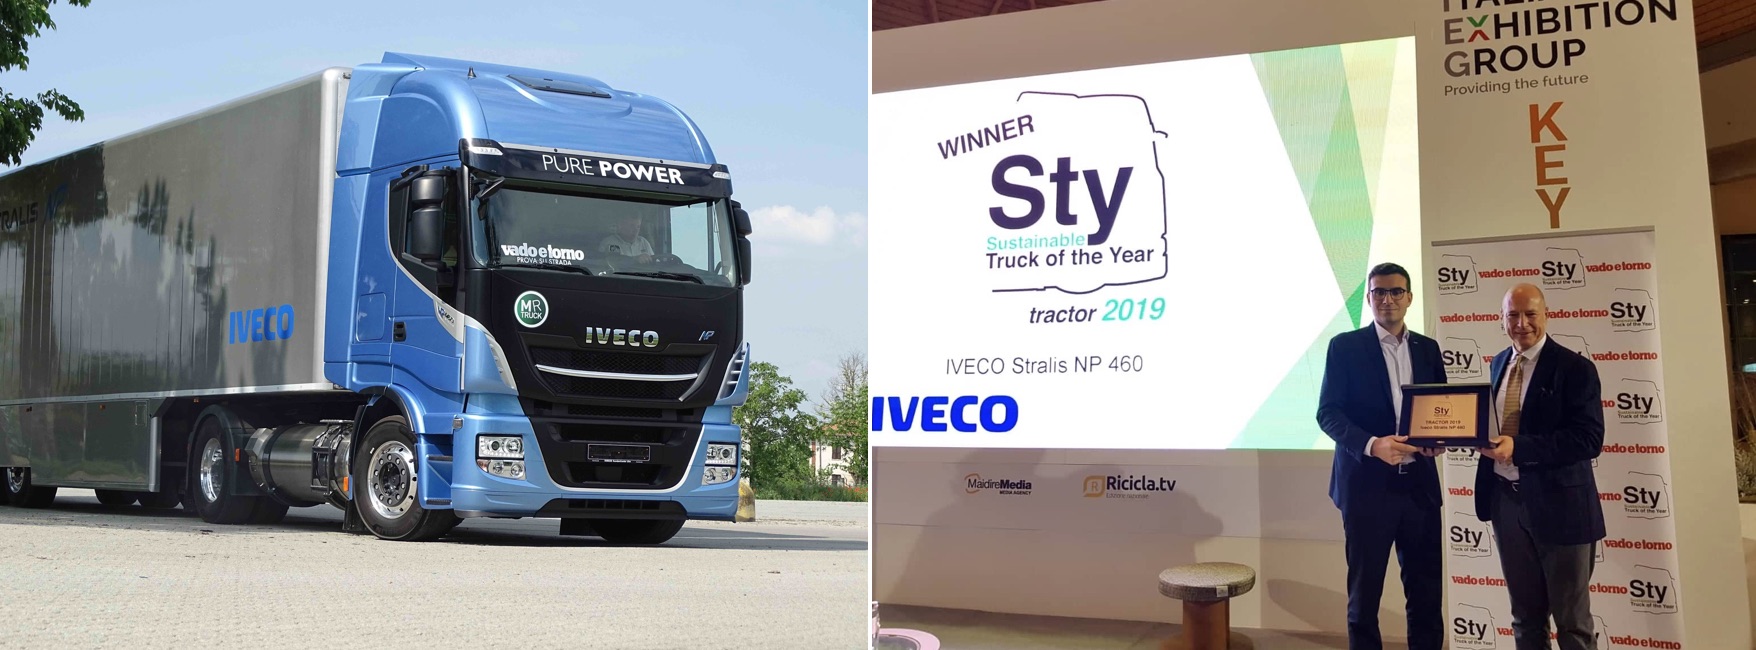 STY ‘TRACTOR 2019’: Iveco Stralis NP 460